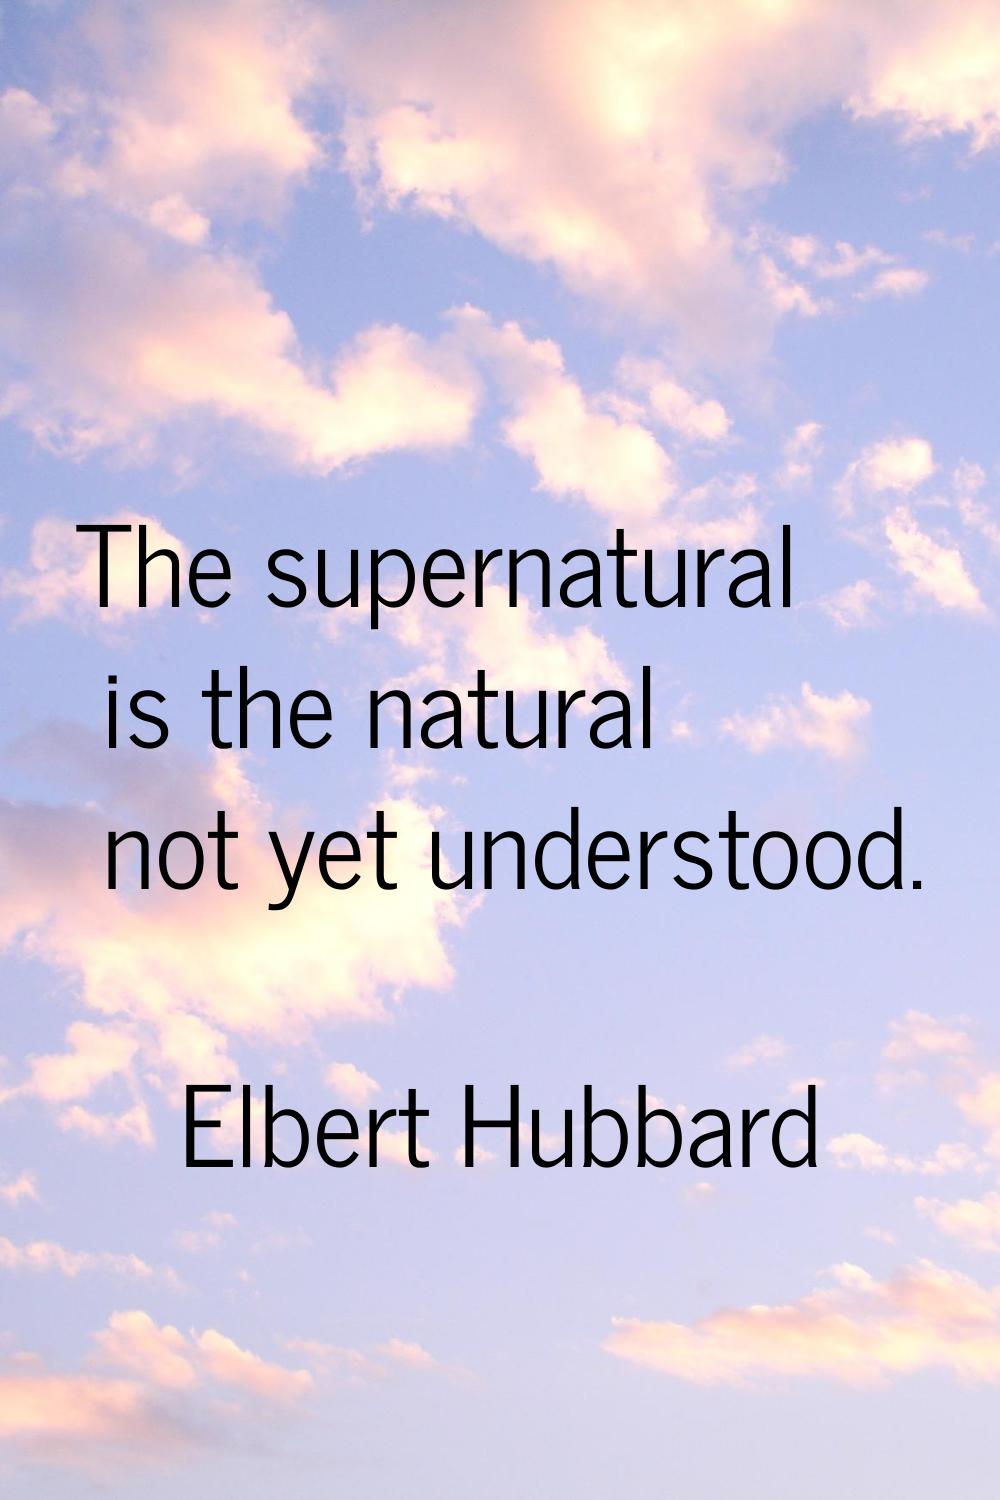 The supernatural is the natural not yet understood.